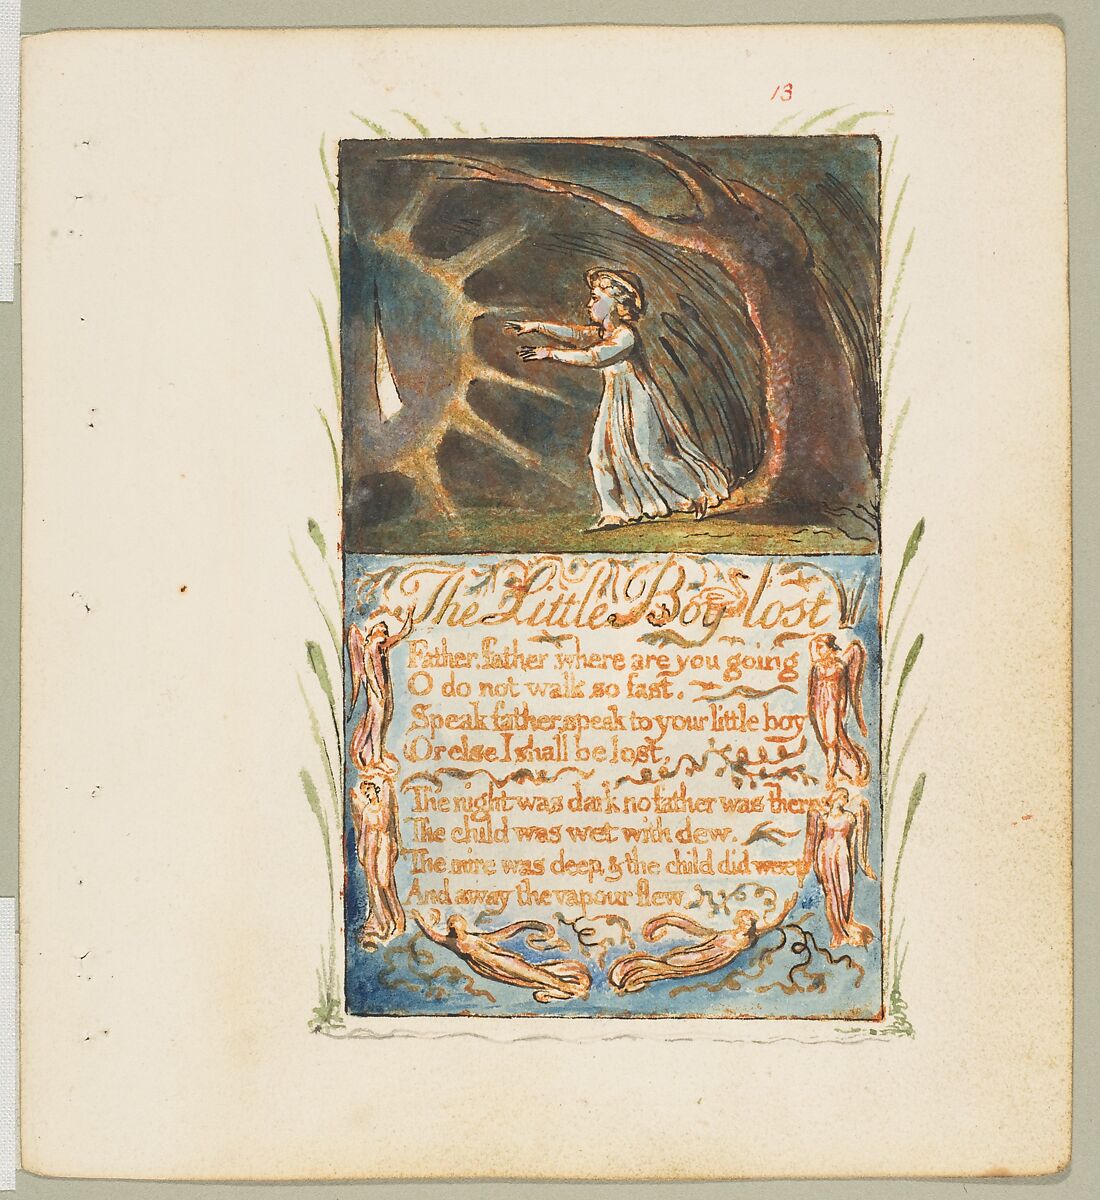 Songs of Innocence: Little Boy Lost, William Blake, Relief etching printed in orange-brown ink and hand-colored with watercolor and shell gold